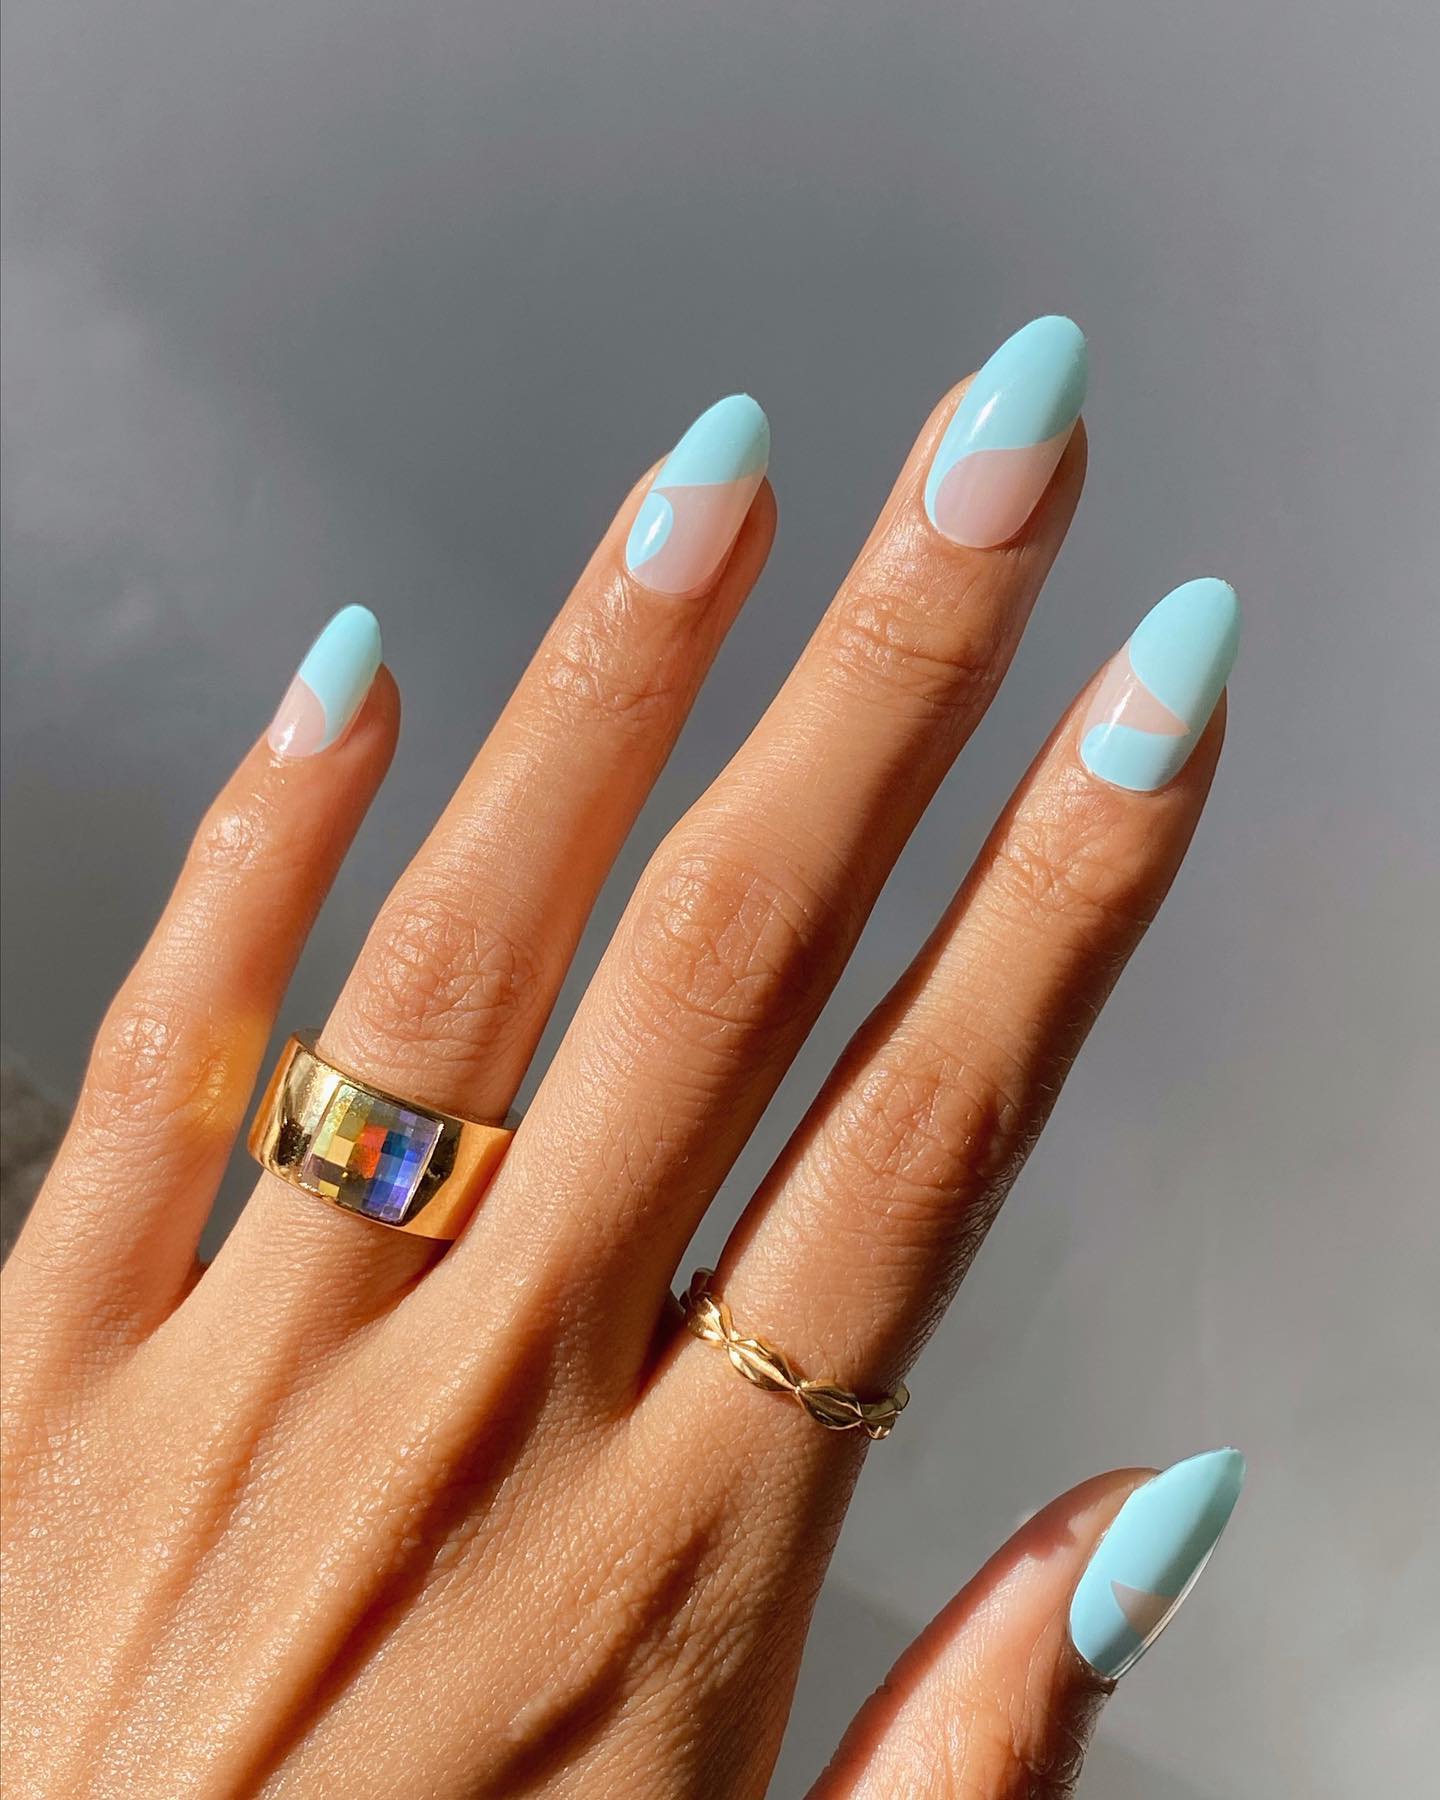 Chic Nail Art Ideas For The Ultimate Mani Inspo 23